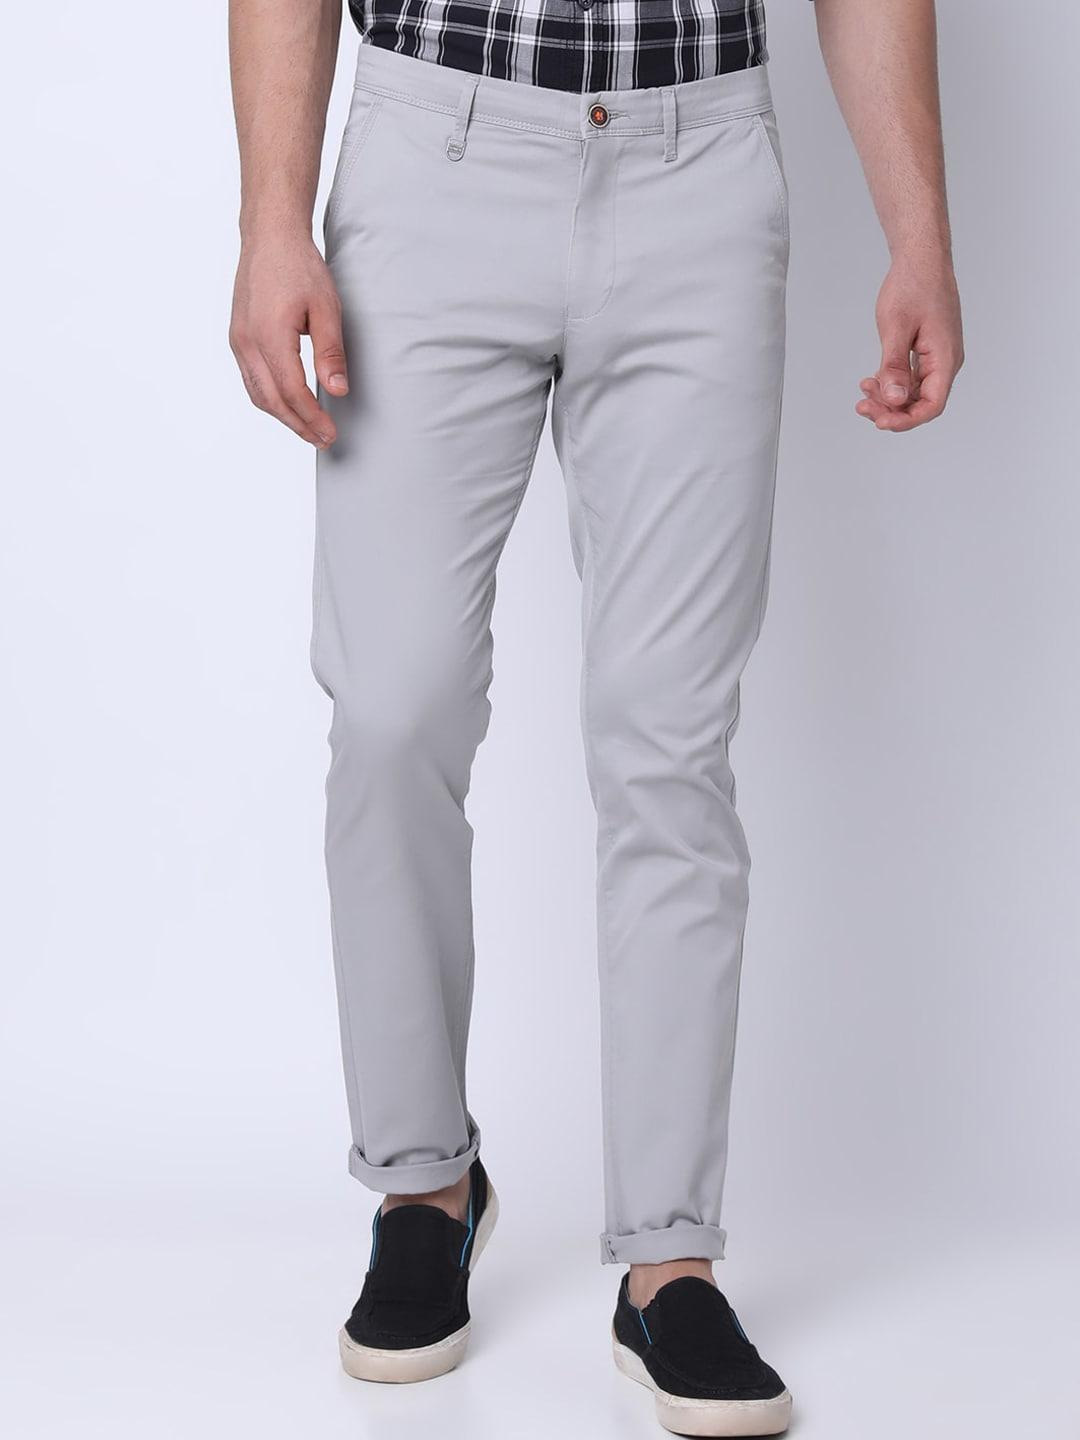 oxemberg men slim fit cotton chinos trousers